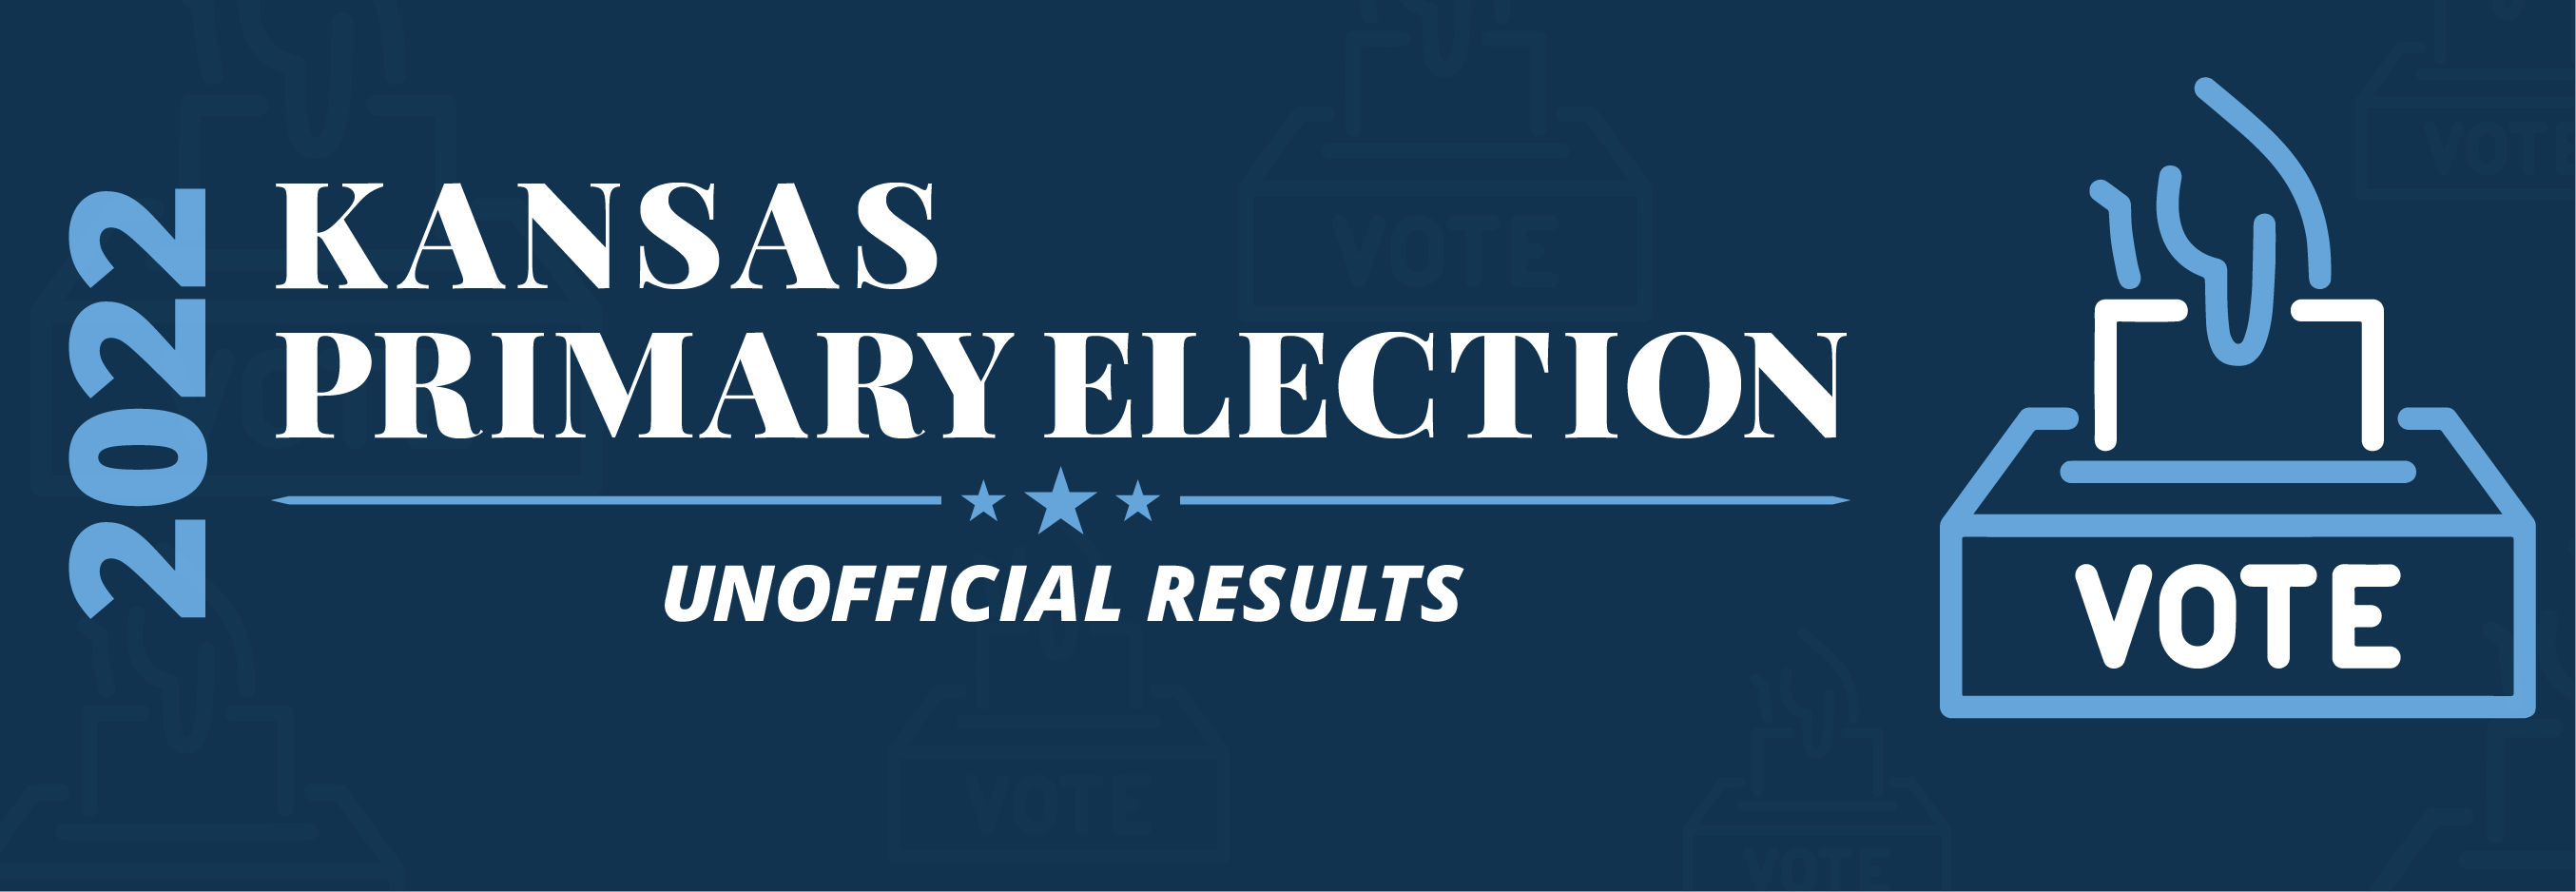 Primary Election Results image